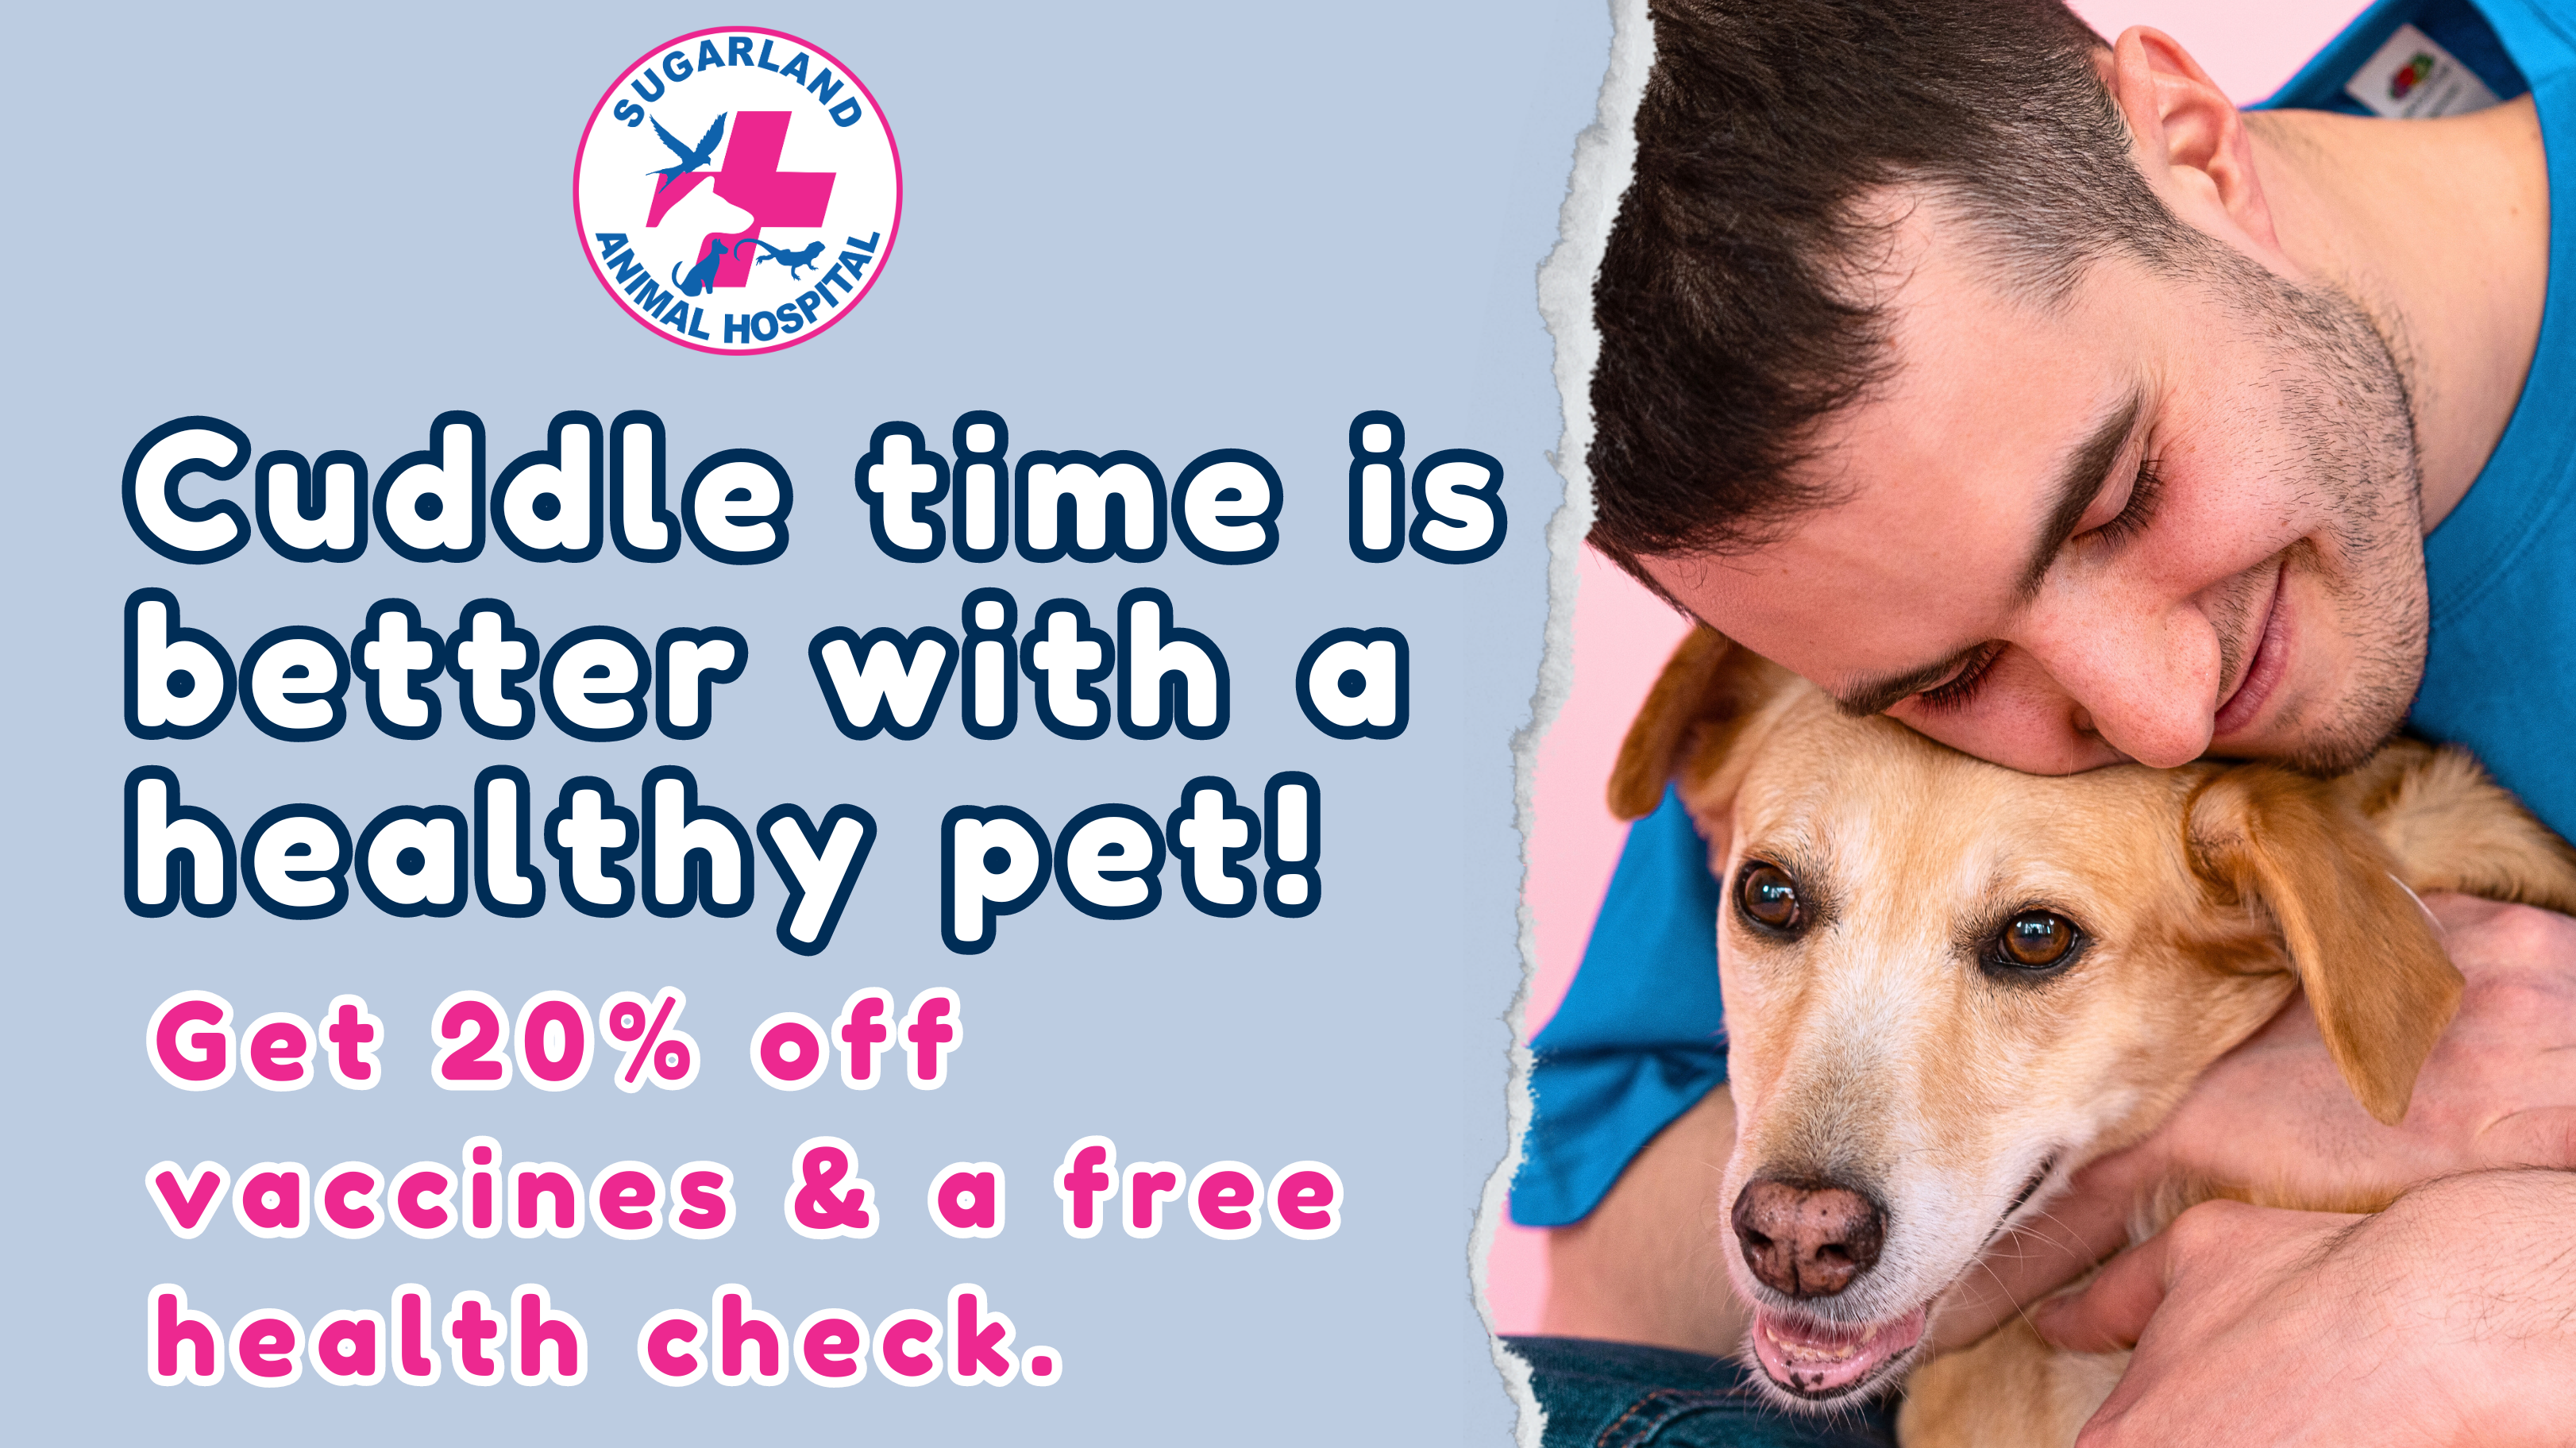 Cuddle time is better with a healthy pet! Get 20% off vaccines & a free health check.